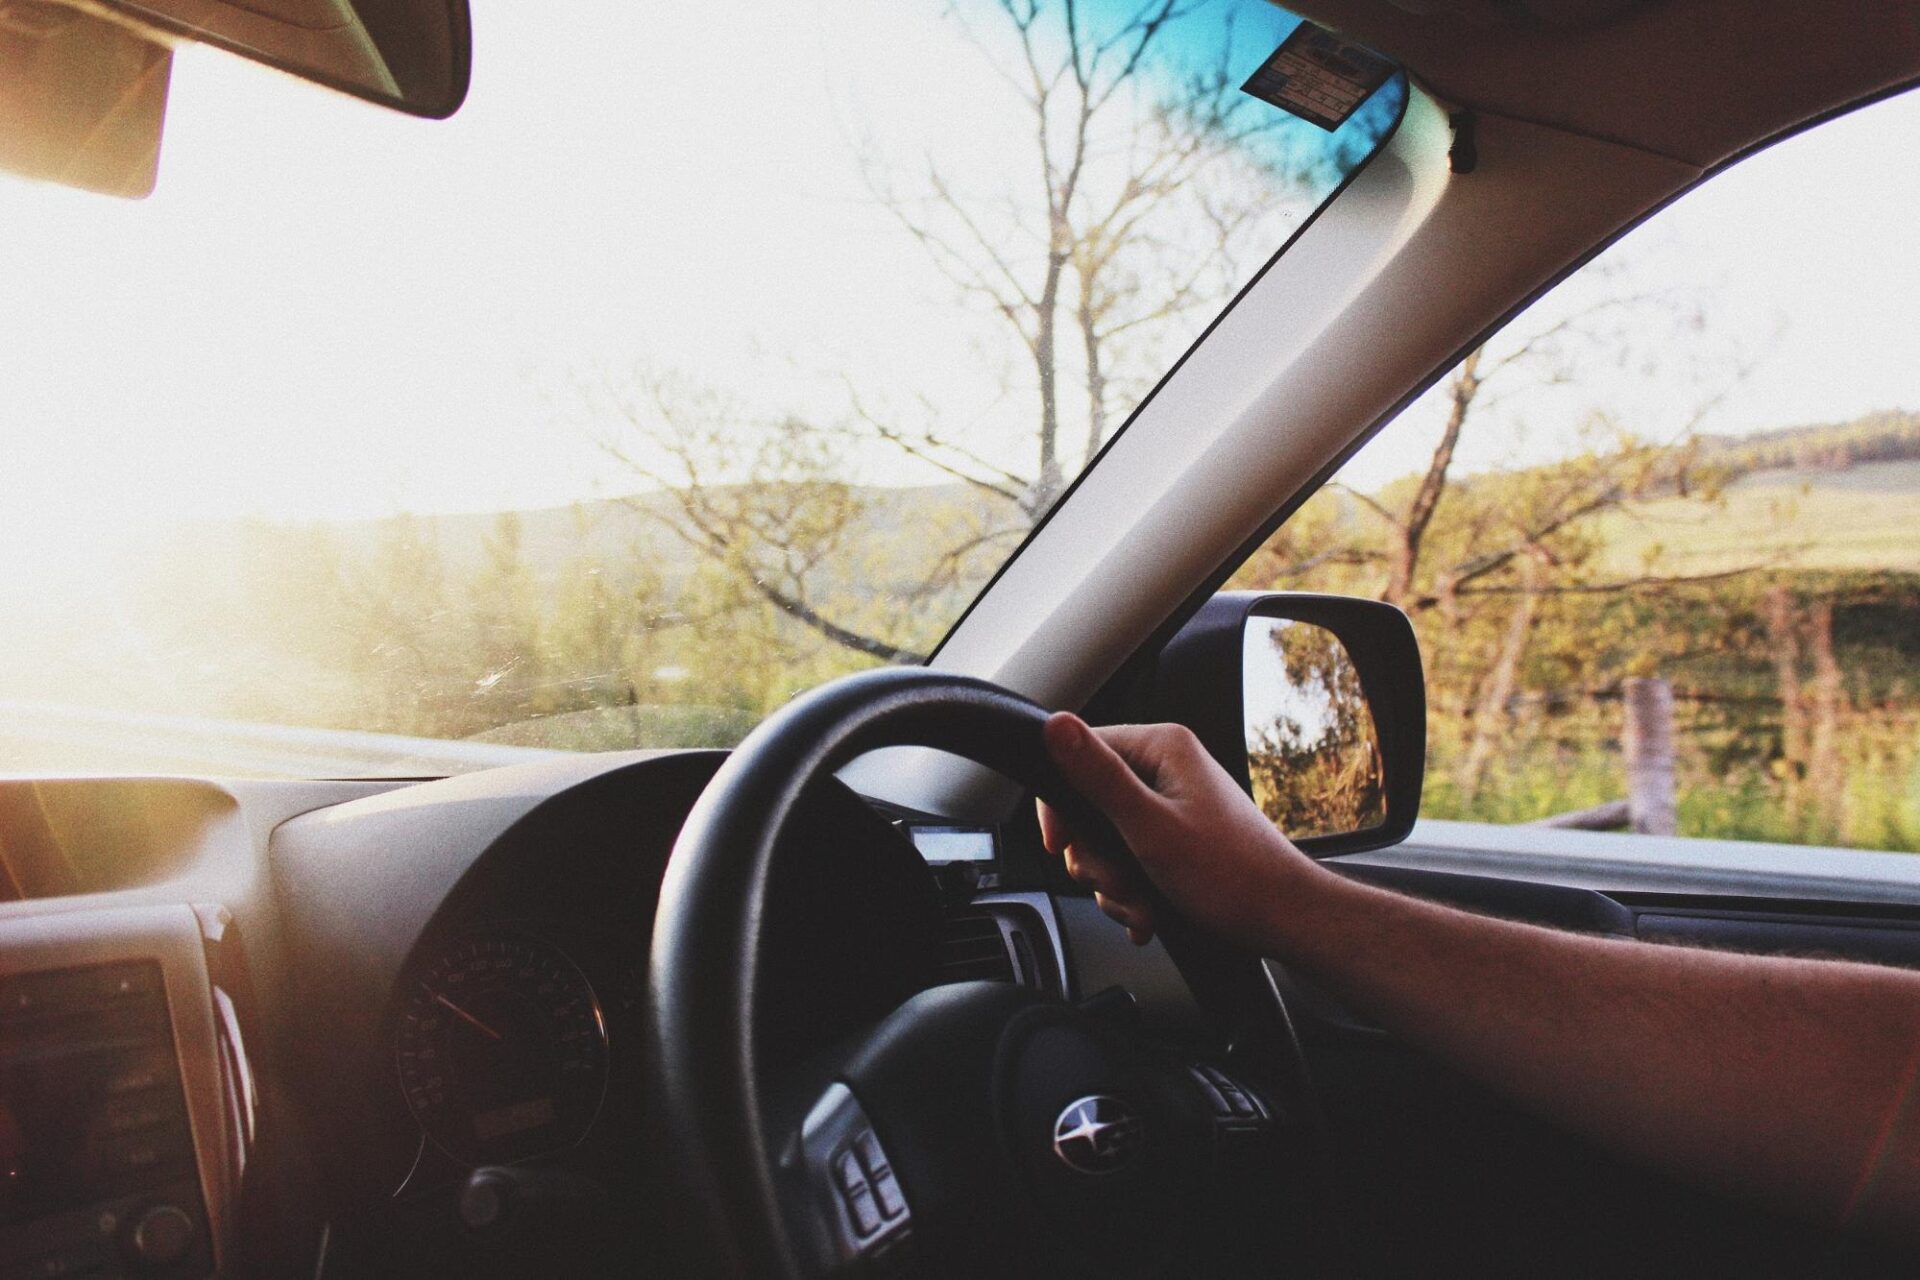 Fit to drive: does hearing loss affect your driving skills?